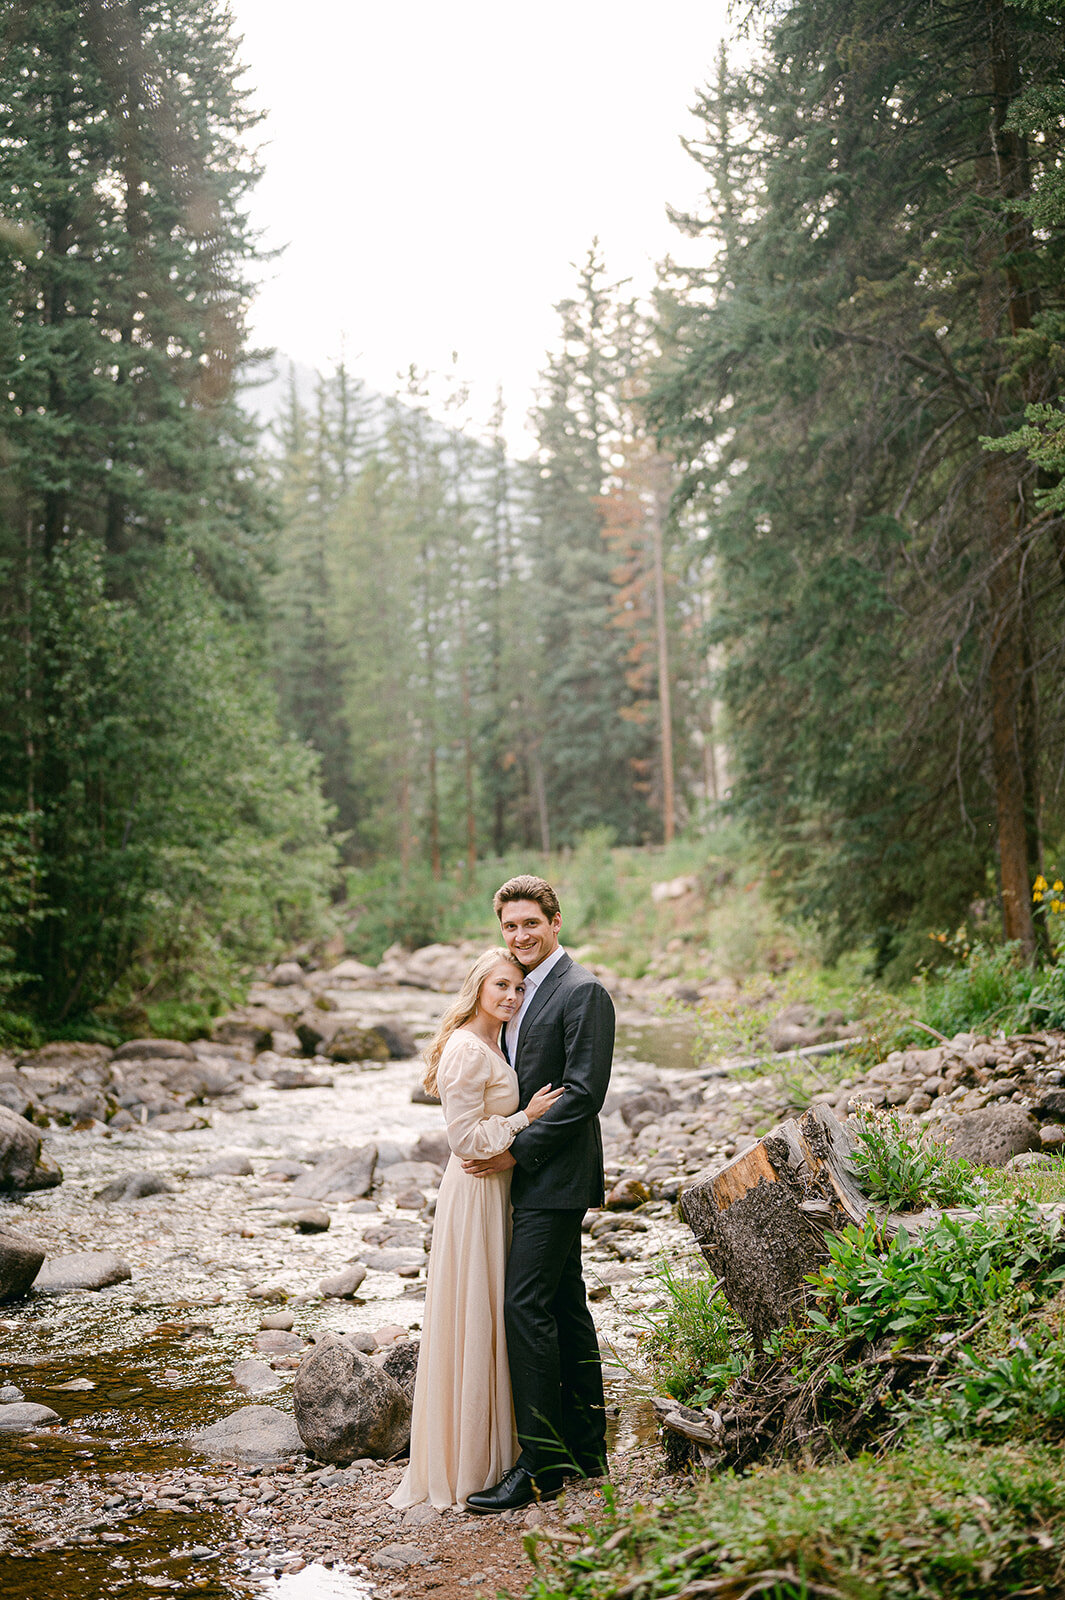 whimsical-vail-village-summer-engagement-by-jacie-marguerite-6